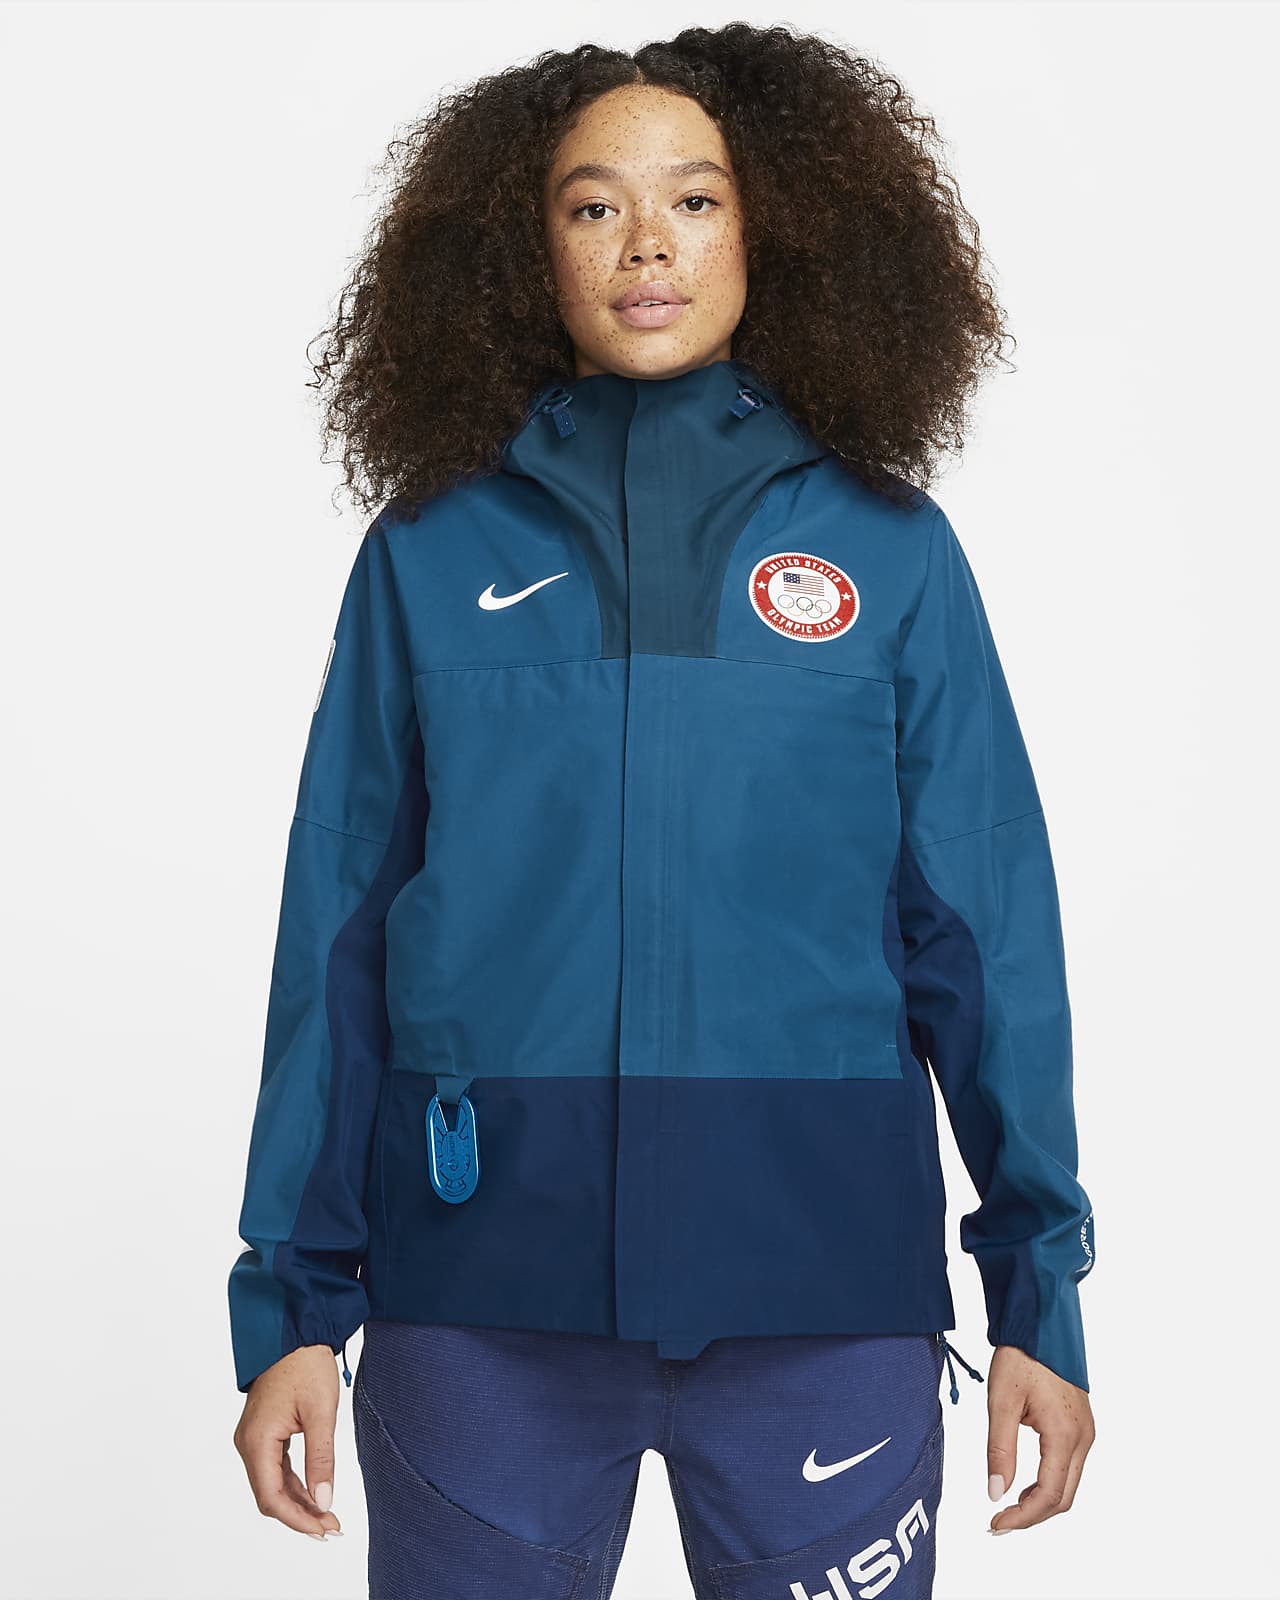 Nike ACG Storm-FIT "Chain of Craters" Women's Jacket. Nike.com